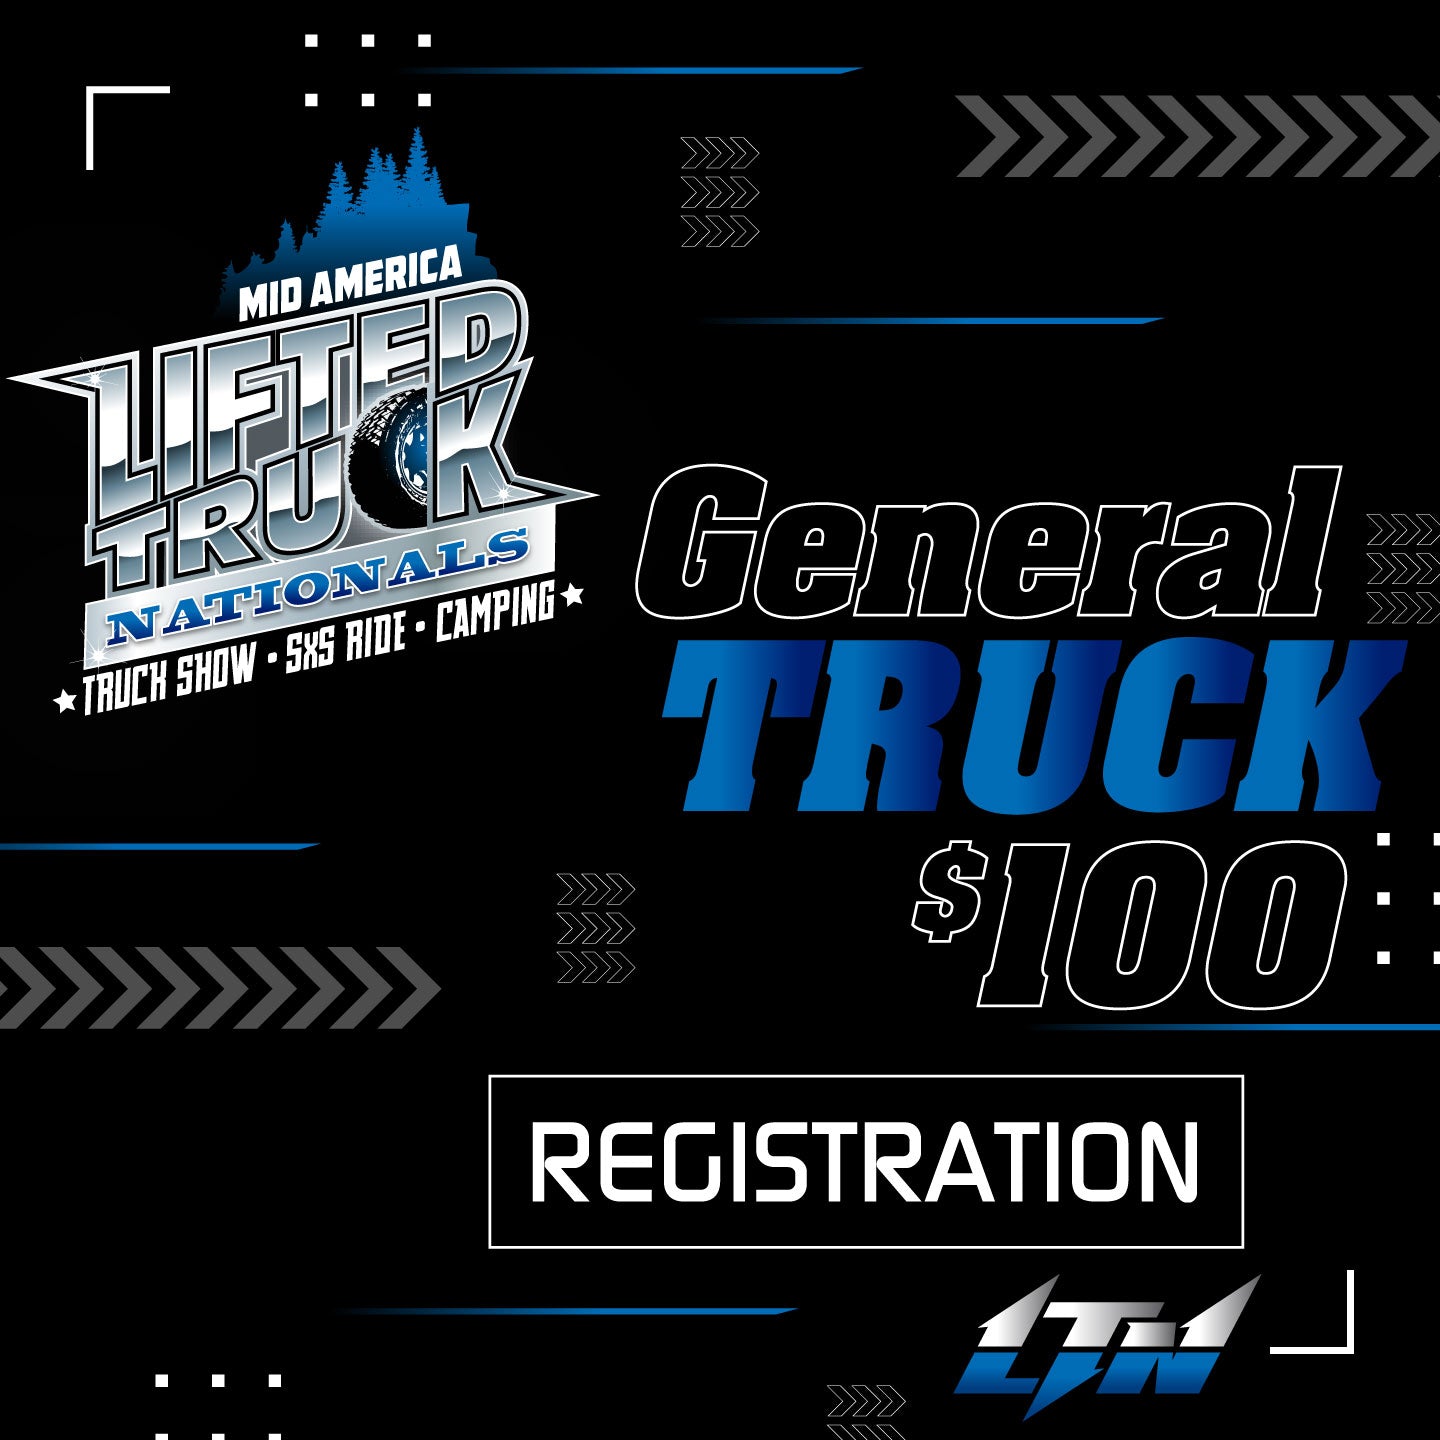 2024 Vehicle Pass - General Show Truck: Sept Lifted Truck Nationals